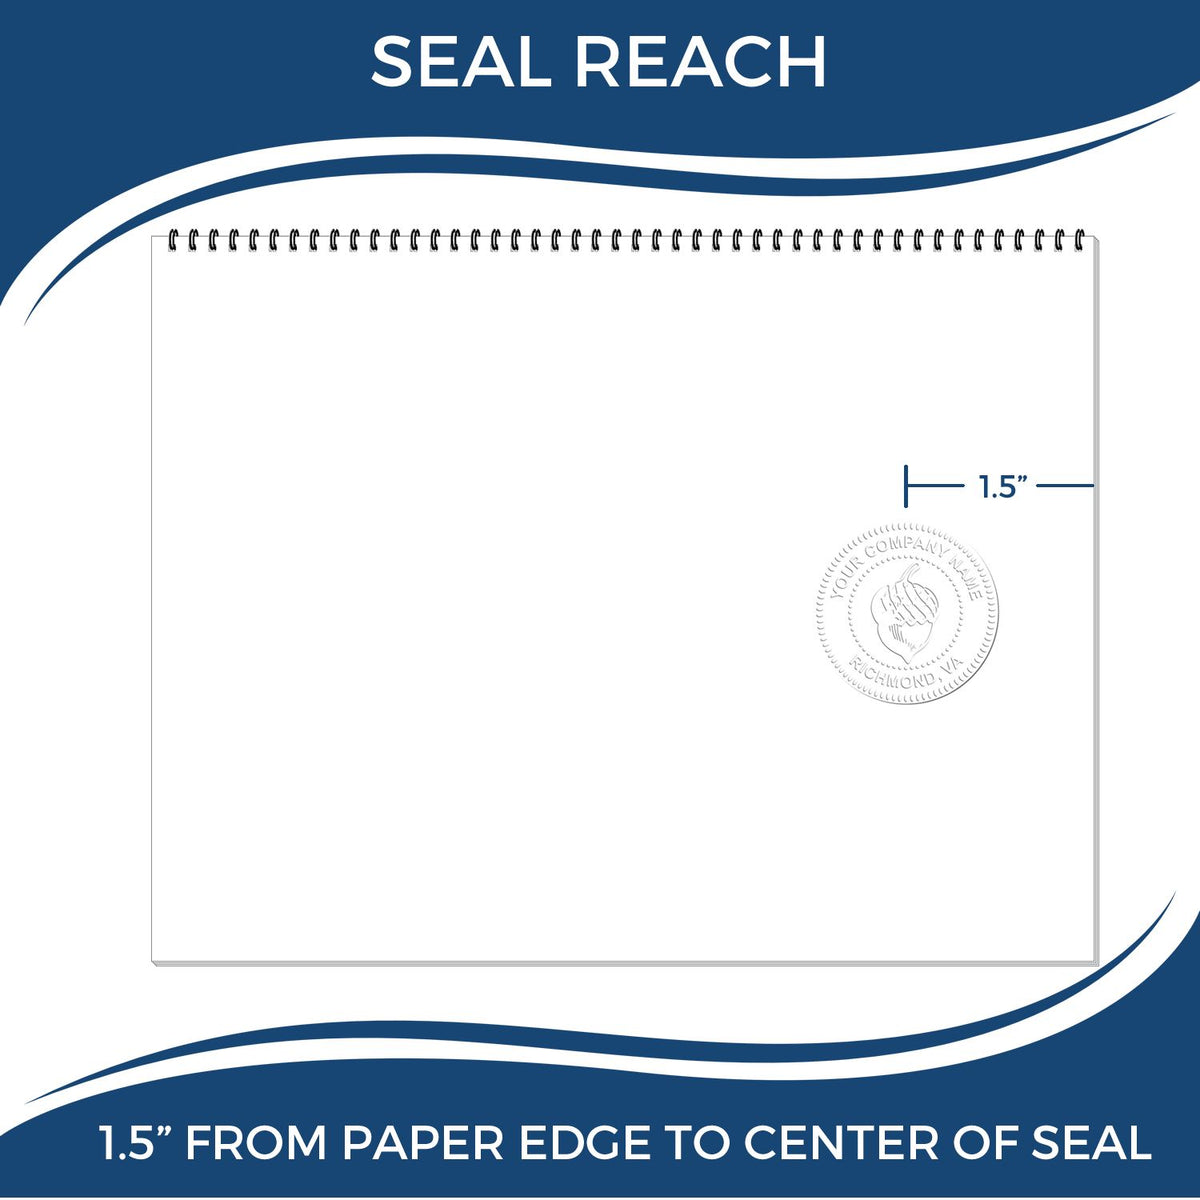 An infographic showing the seal reach which is represented by a ruler and a miniature seal image of the Hybrid North Carolina Landscape Architect Seal